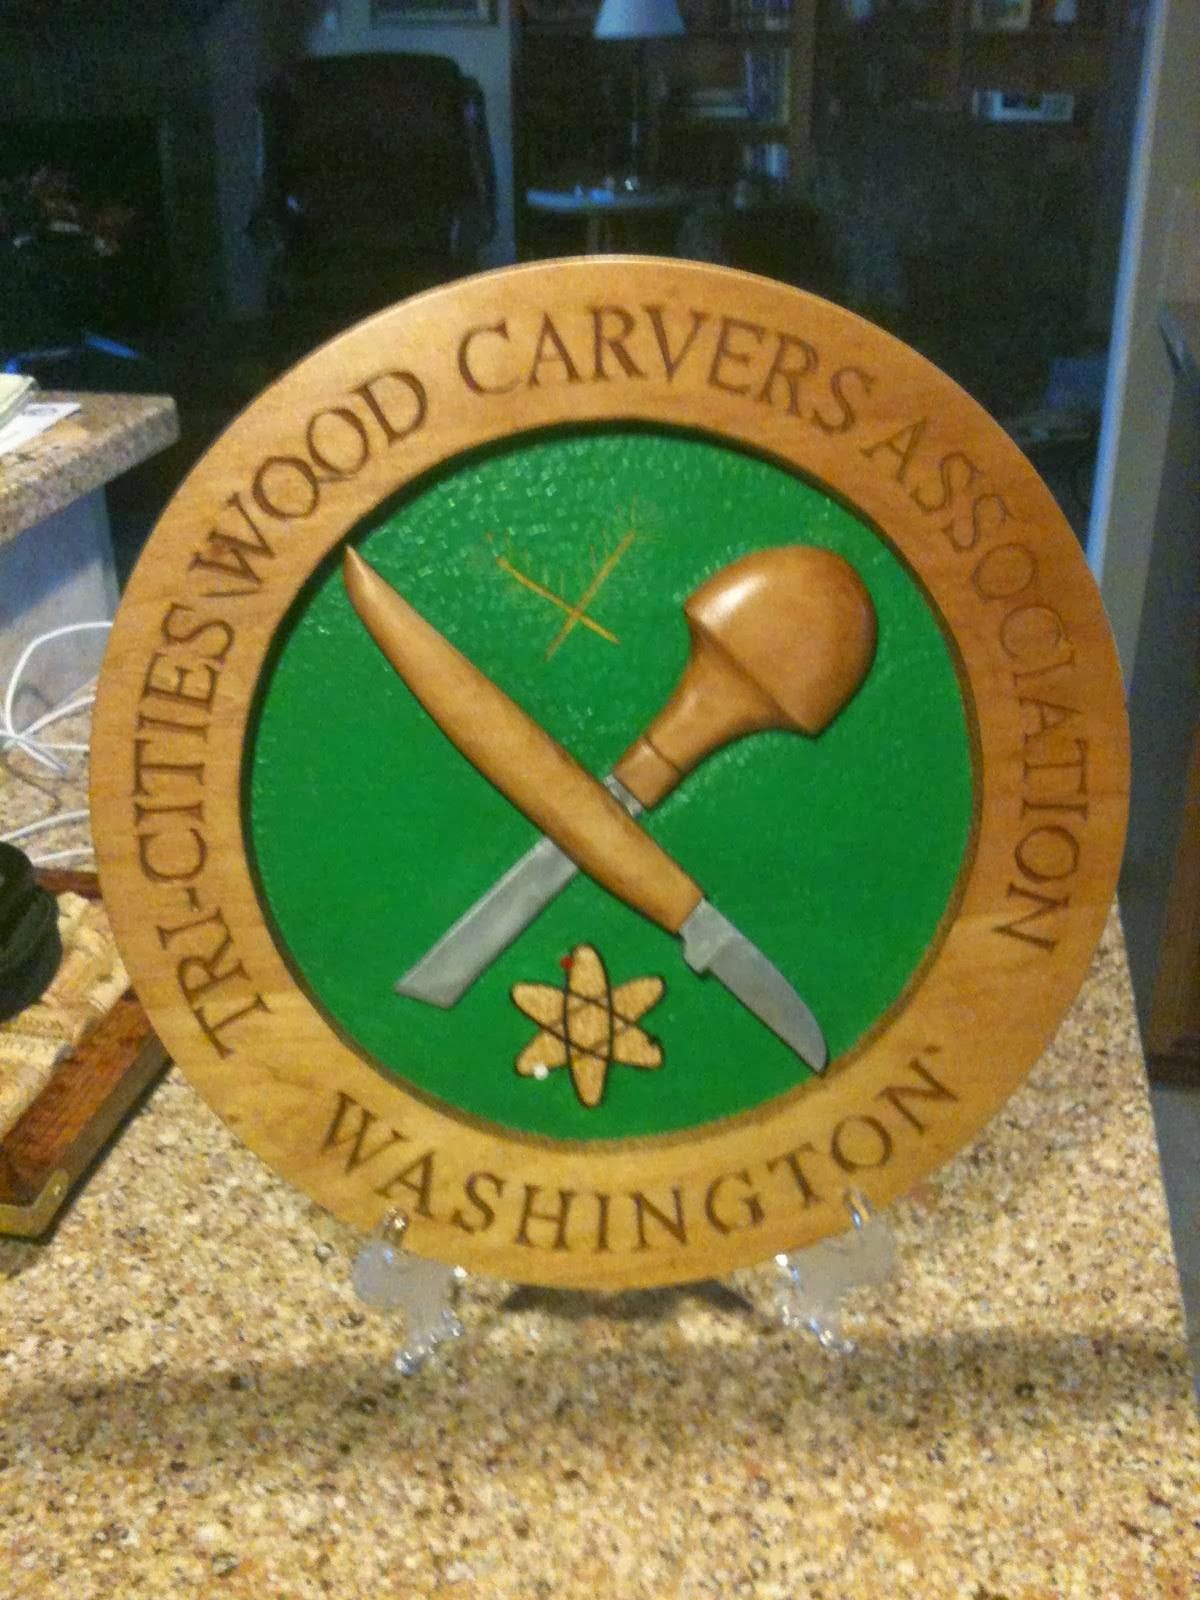 Tri-Cities Wood Carvers - Artistry In Wood Show In Kennewick, Washington